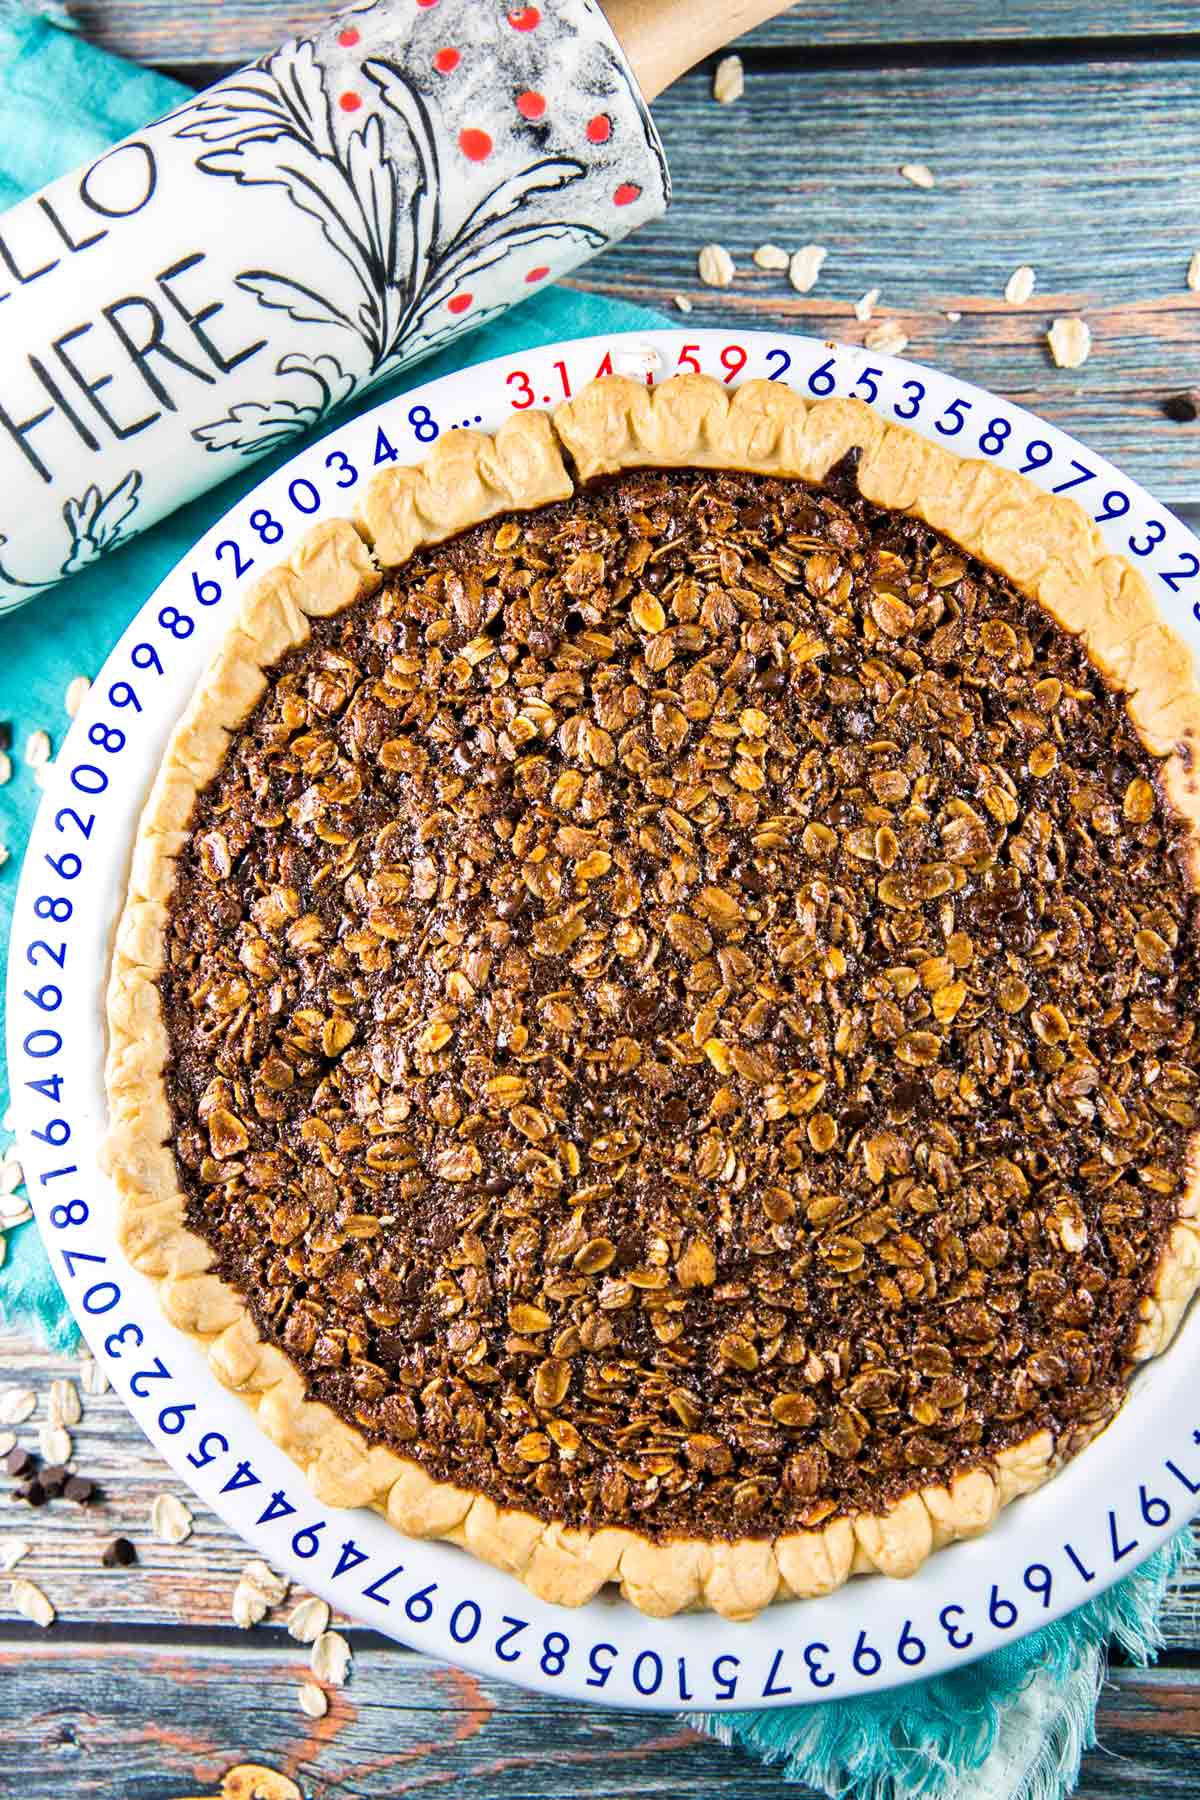 pie crust filled with a chocolate, molasses, and oatmeal filling